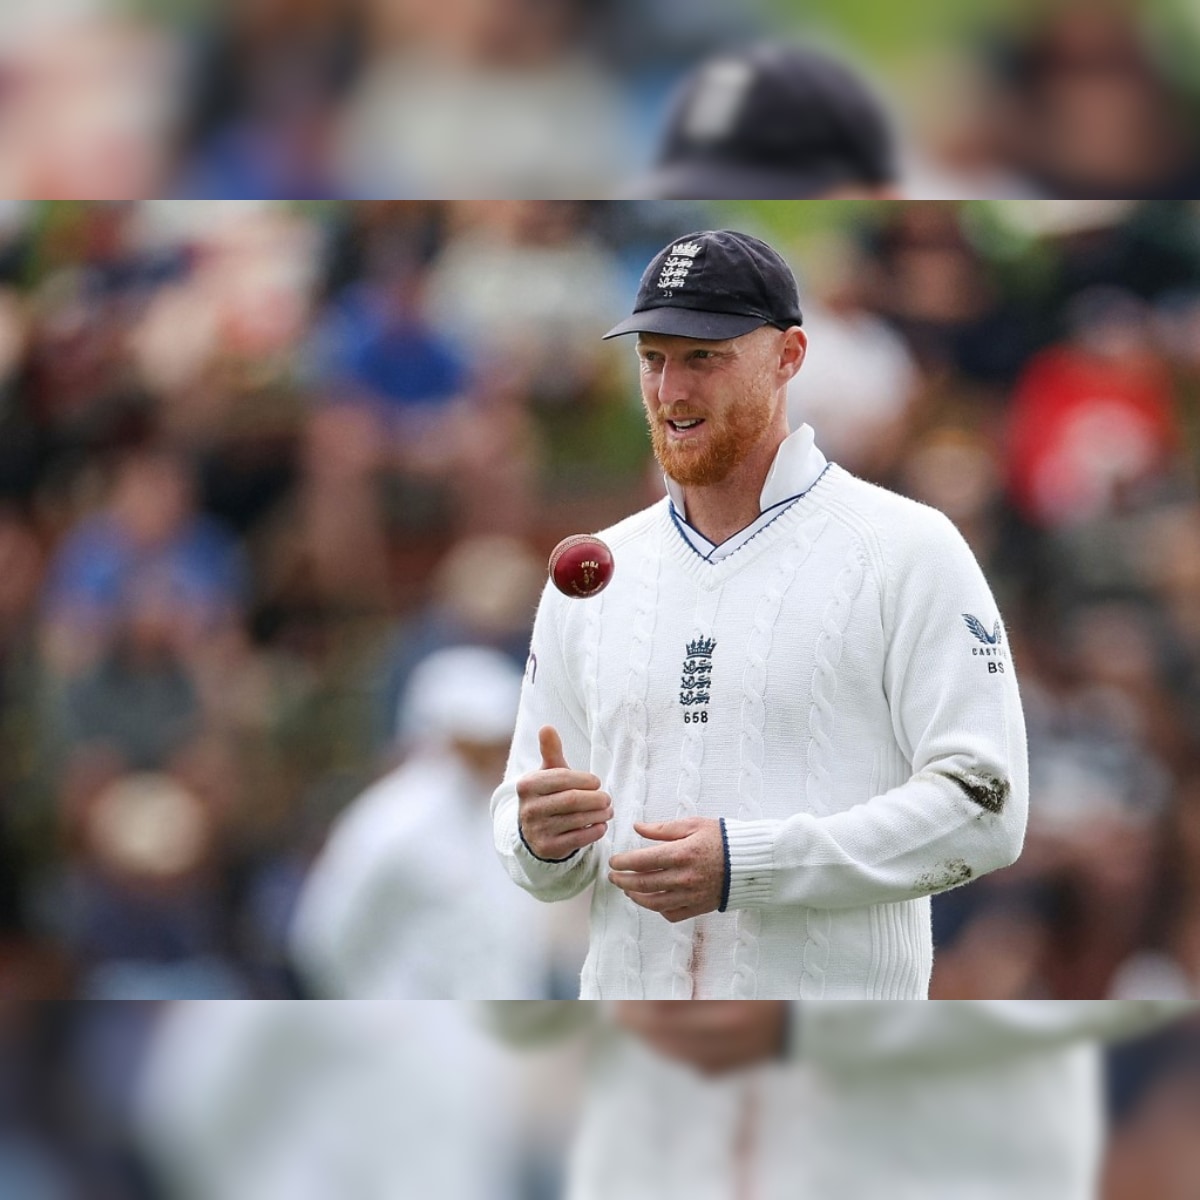 To Whoever Stole my Bag...': Ben Stokes Furious After Upsetting Incident